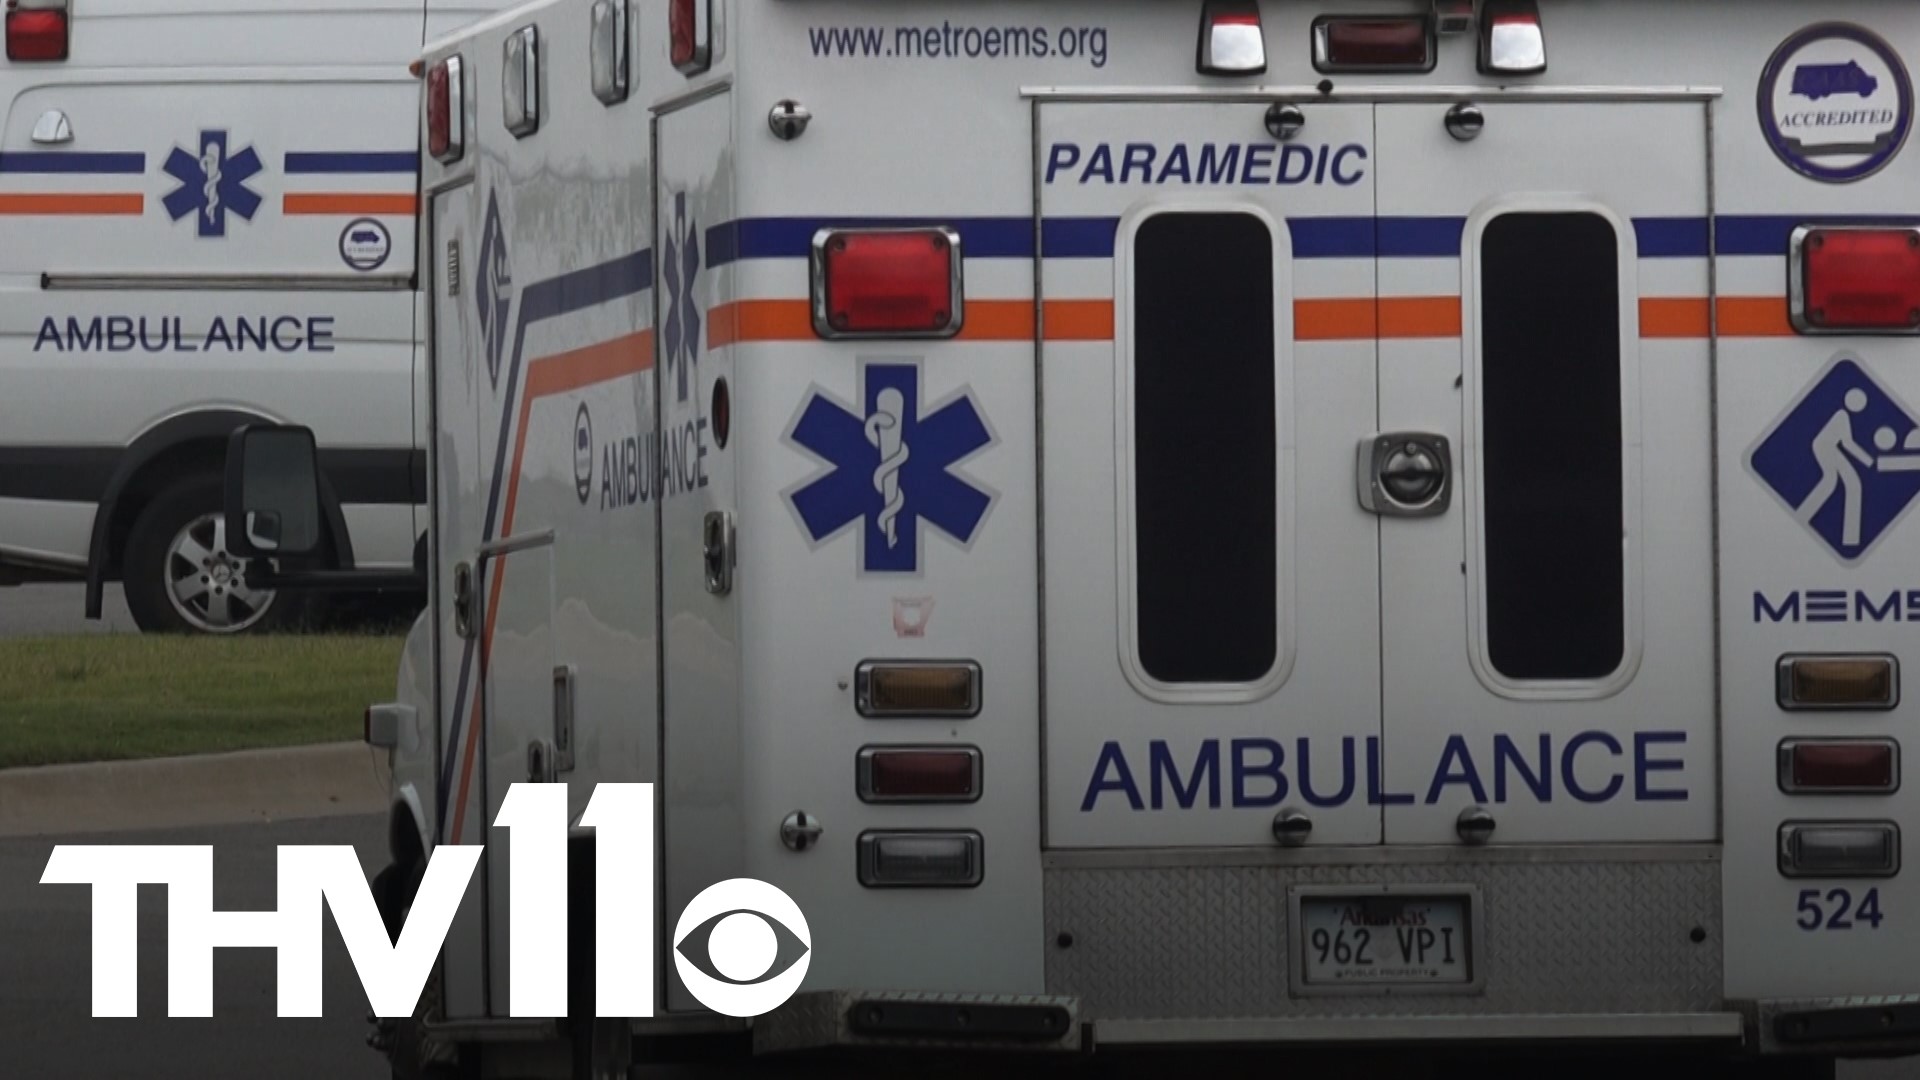 The surge in COVID-19 cases is now impacting ambulance services in Arkansas.